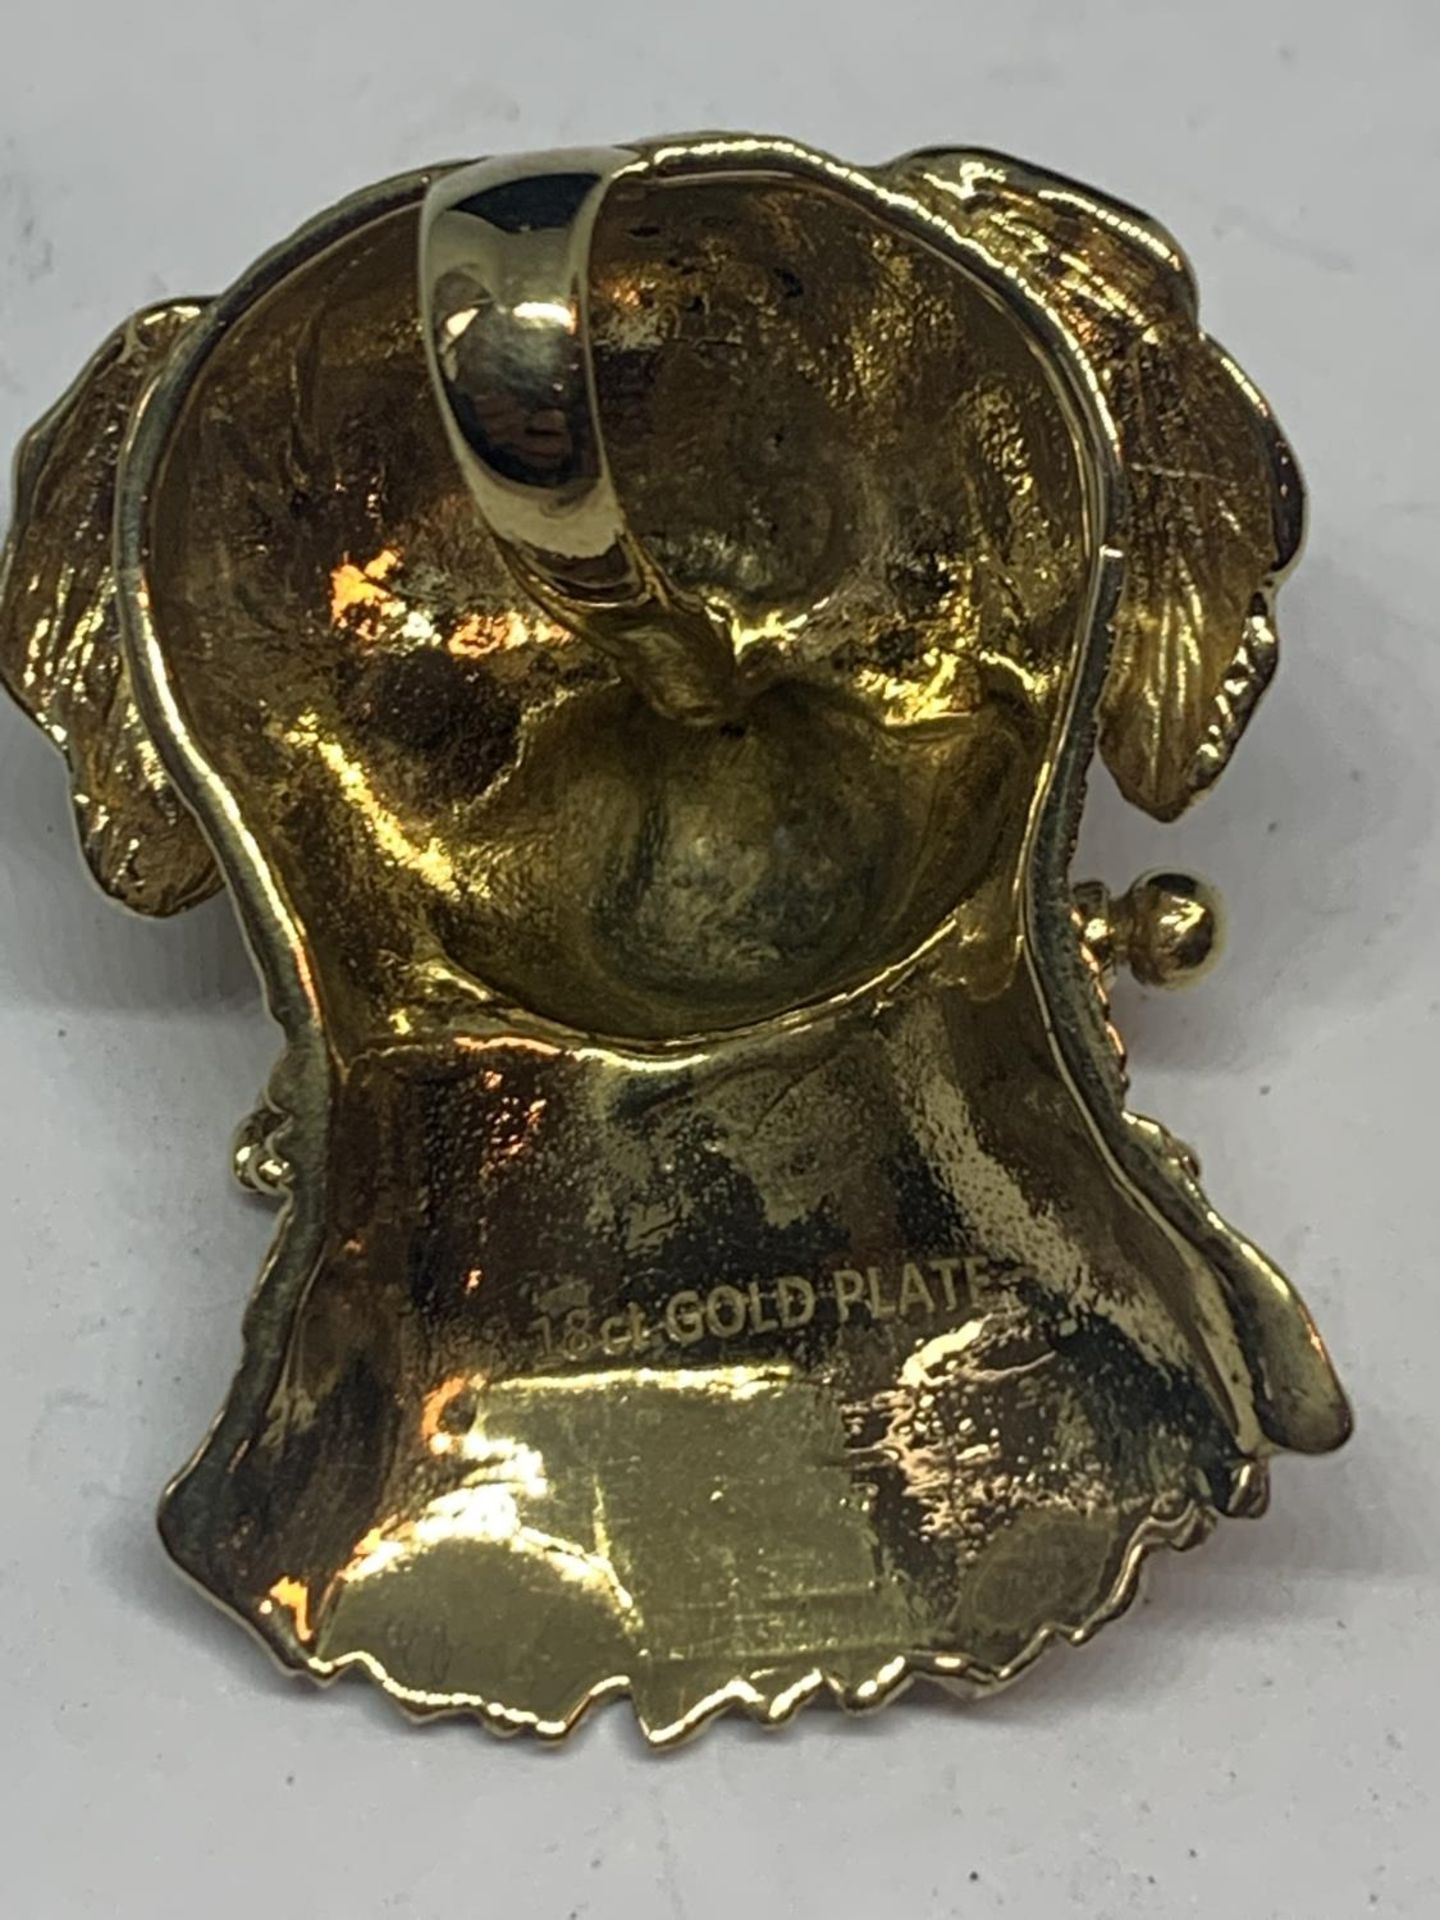 A SILVER GILT PENDANT IN THE FORM OF A DOG WITH GLASS EYES - Image 3 of 4